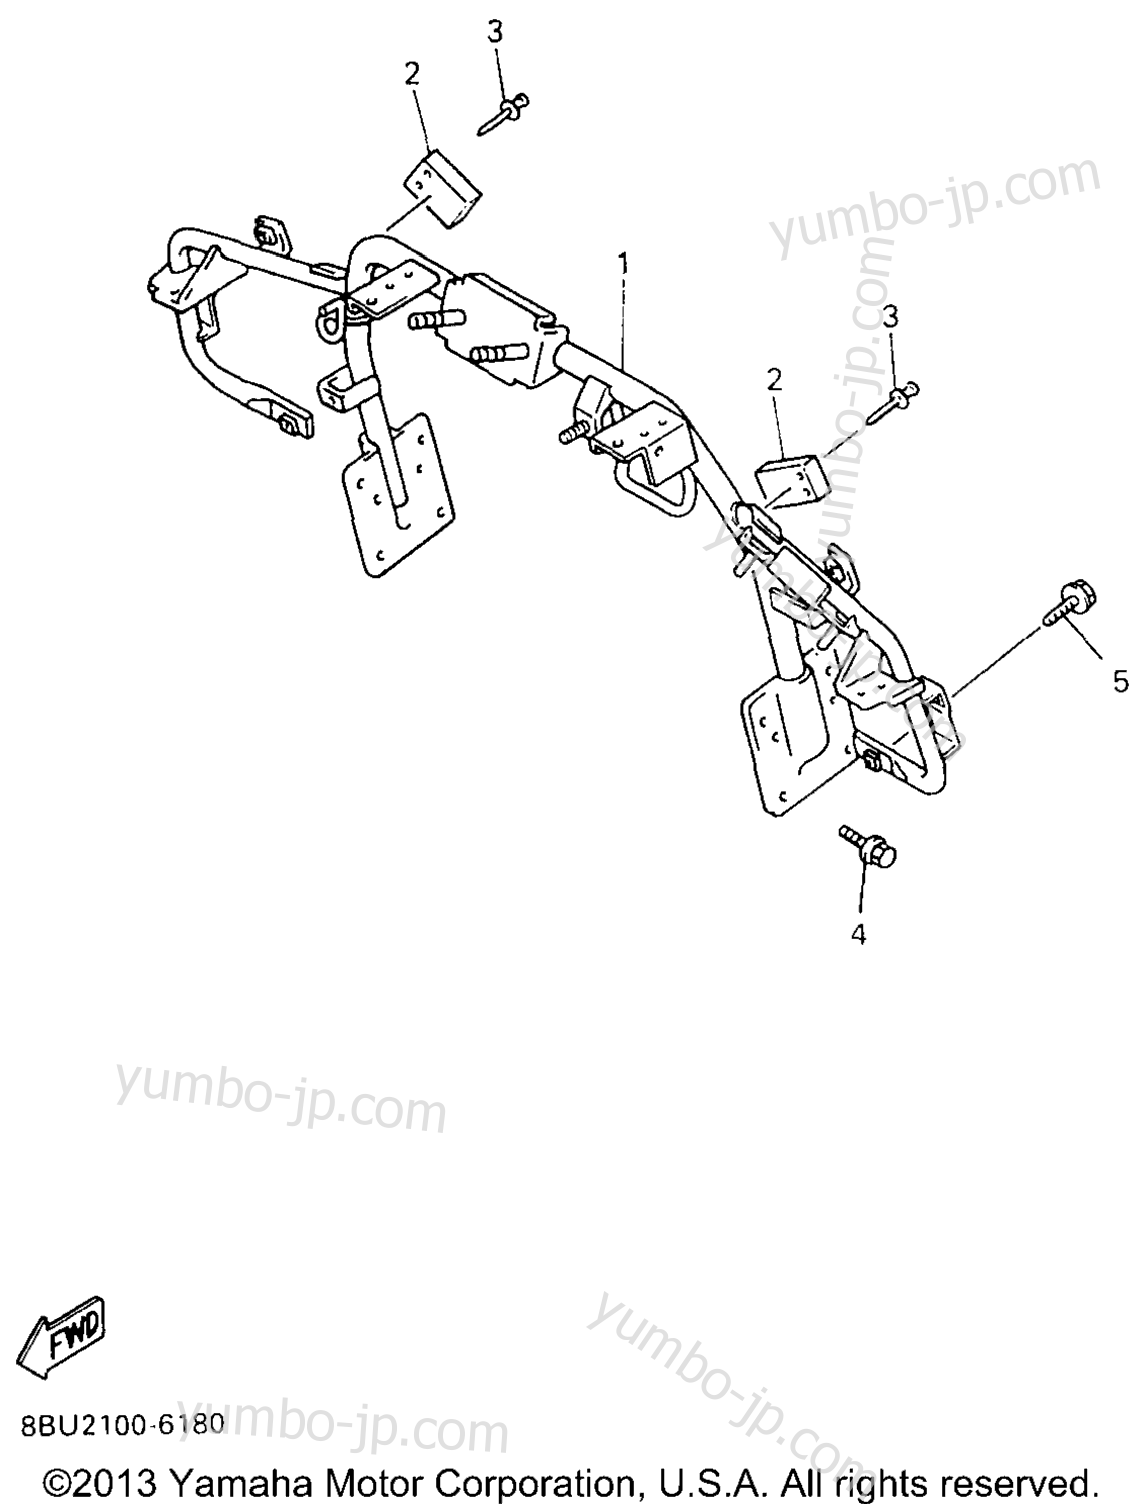 Steering Gate for snowmobiles YAMAHA VMAX-4 800 (VX800A) 1997 year